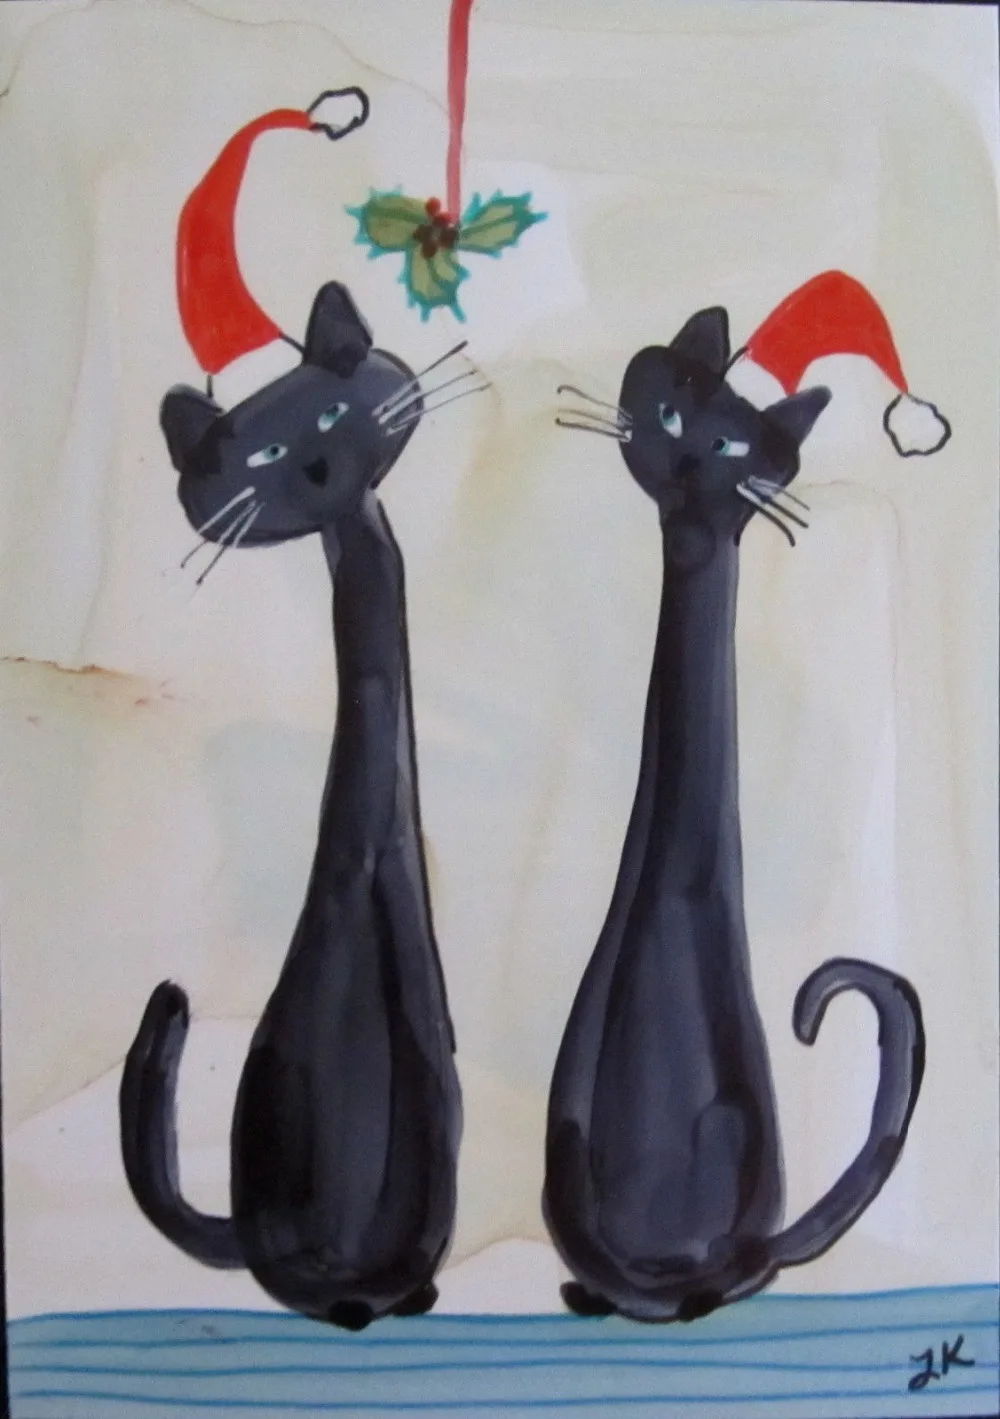 

Abstract Animal Painting for Kids Room Home Decor Art Canvas Oil Painting Black Cats Mistletoe Christmas Hats by L Kohler